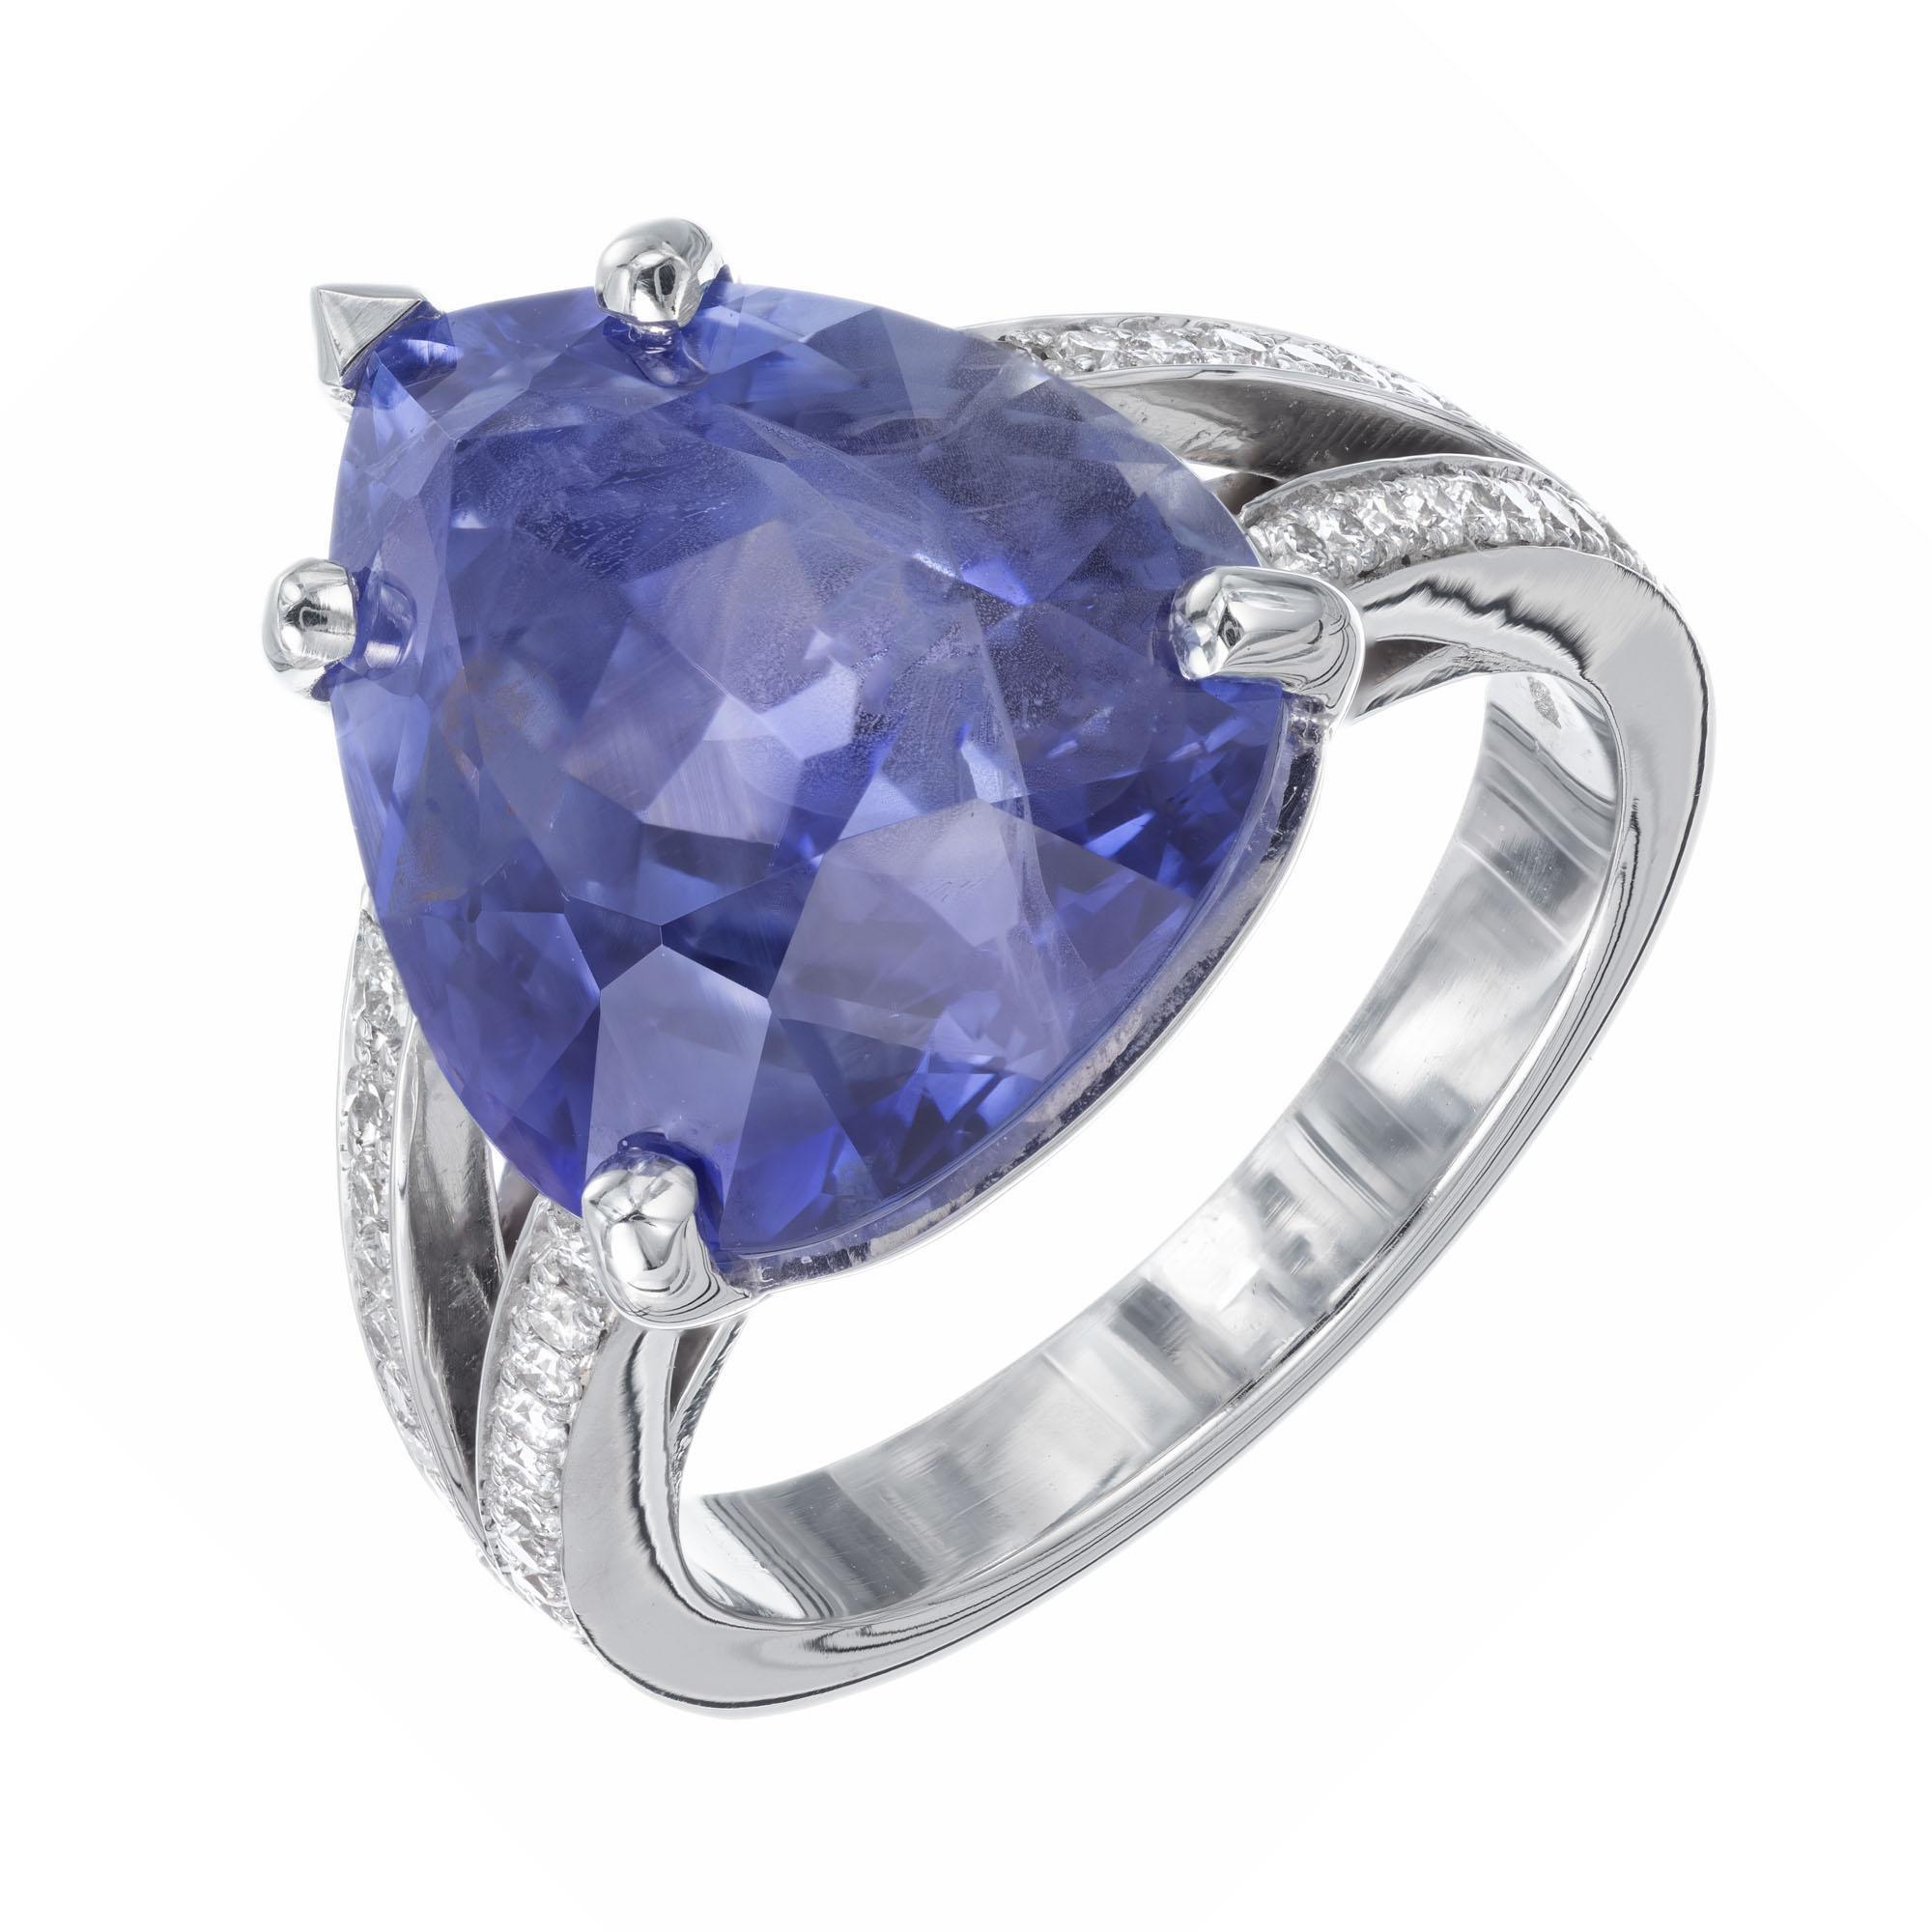 Sapphire and diamond engagement ring. Pear shaped sapphire center stone set in a platinum setting with 48 round ideal cut diamonds.  There are natural veil type flaws and feathers that partially separate the color zones. 

1 pear shaped blue